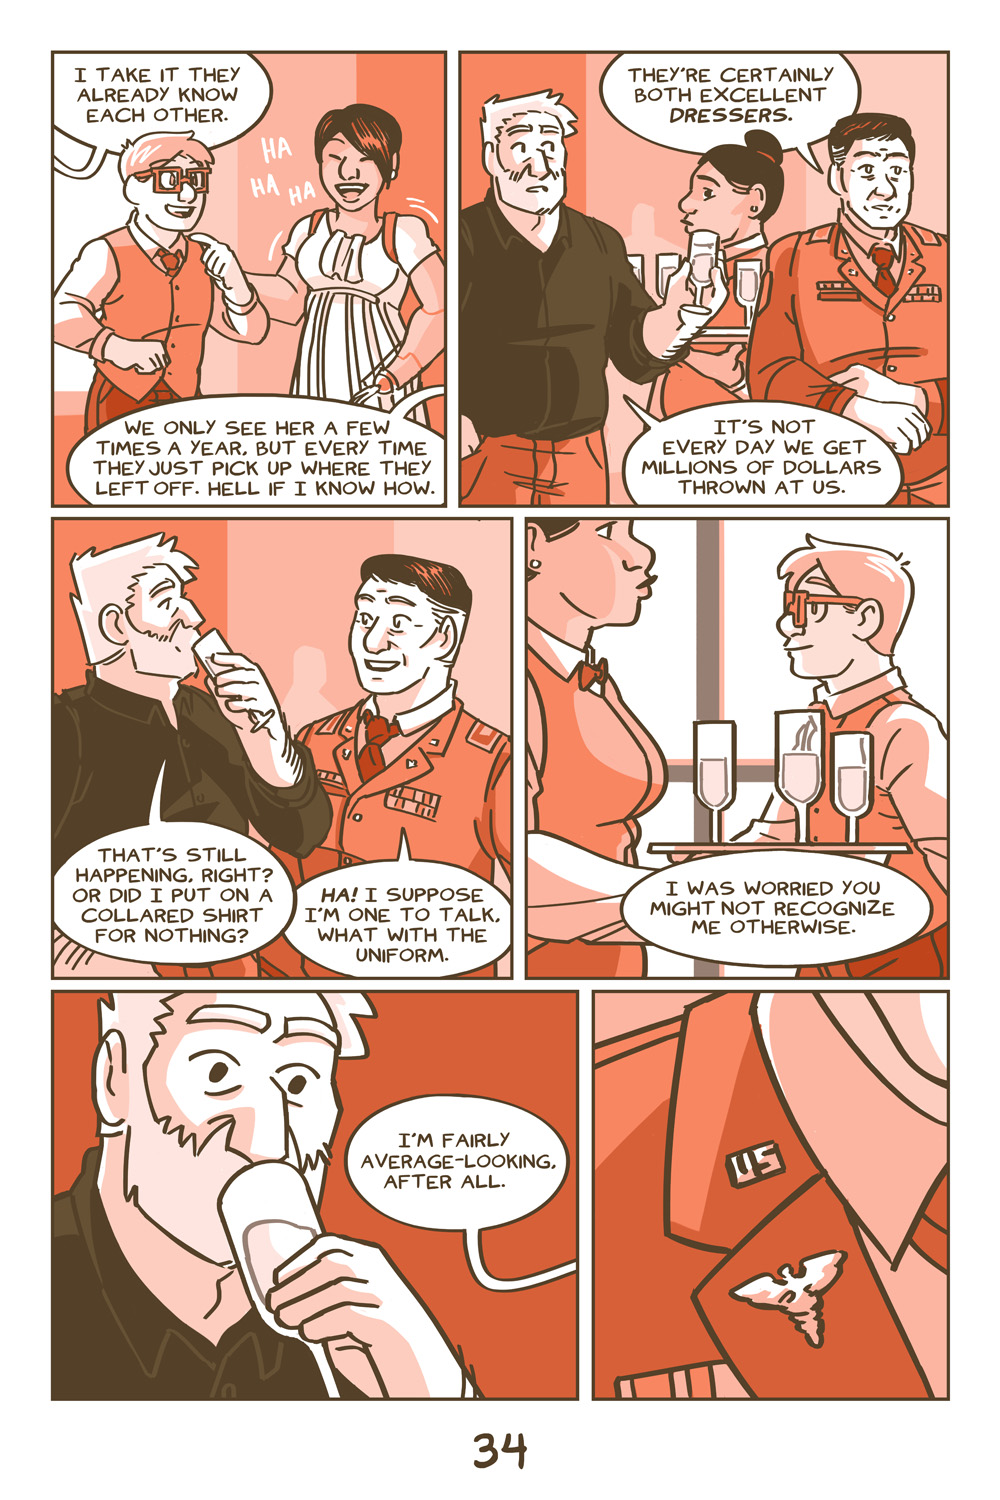 Chapter 4, Page 34